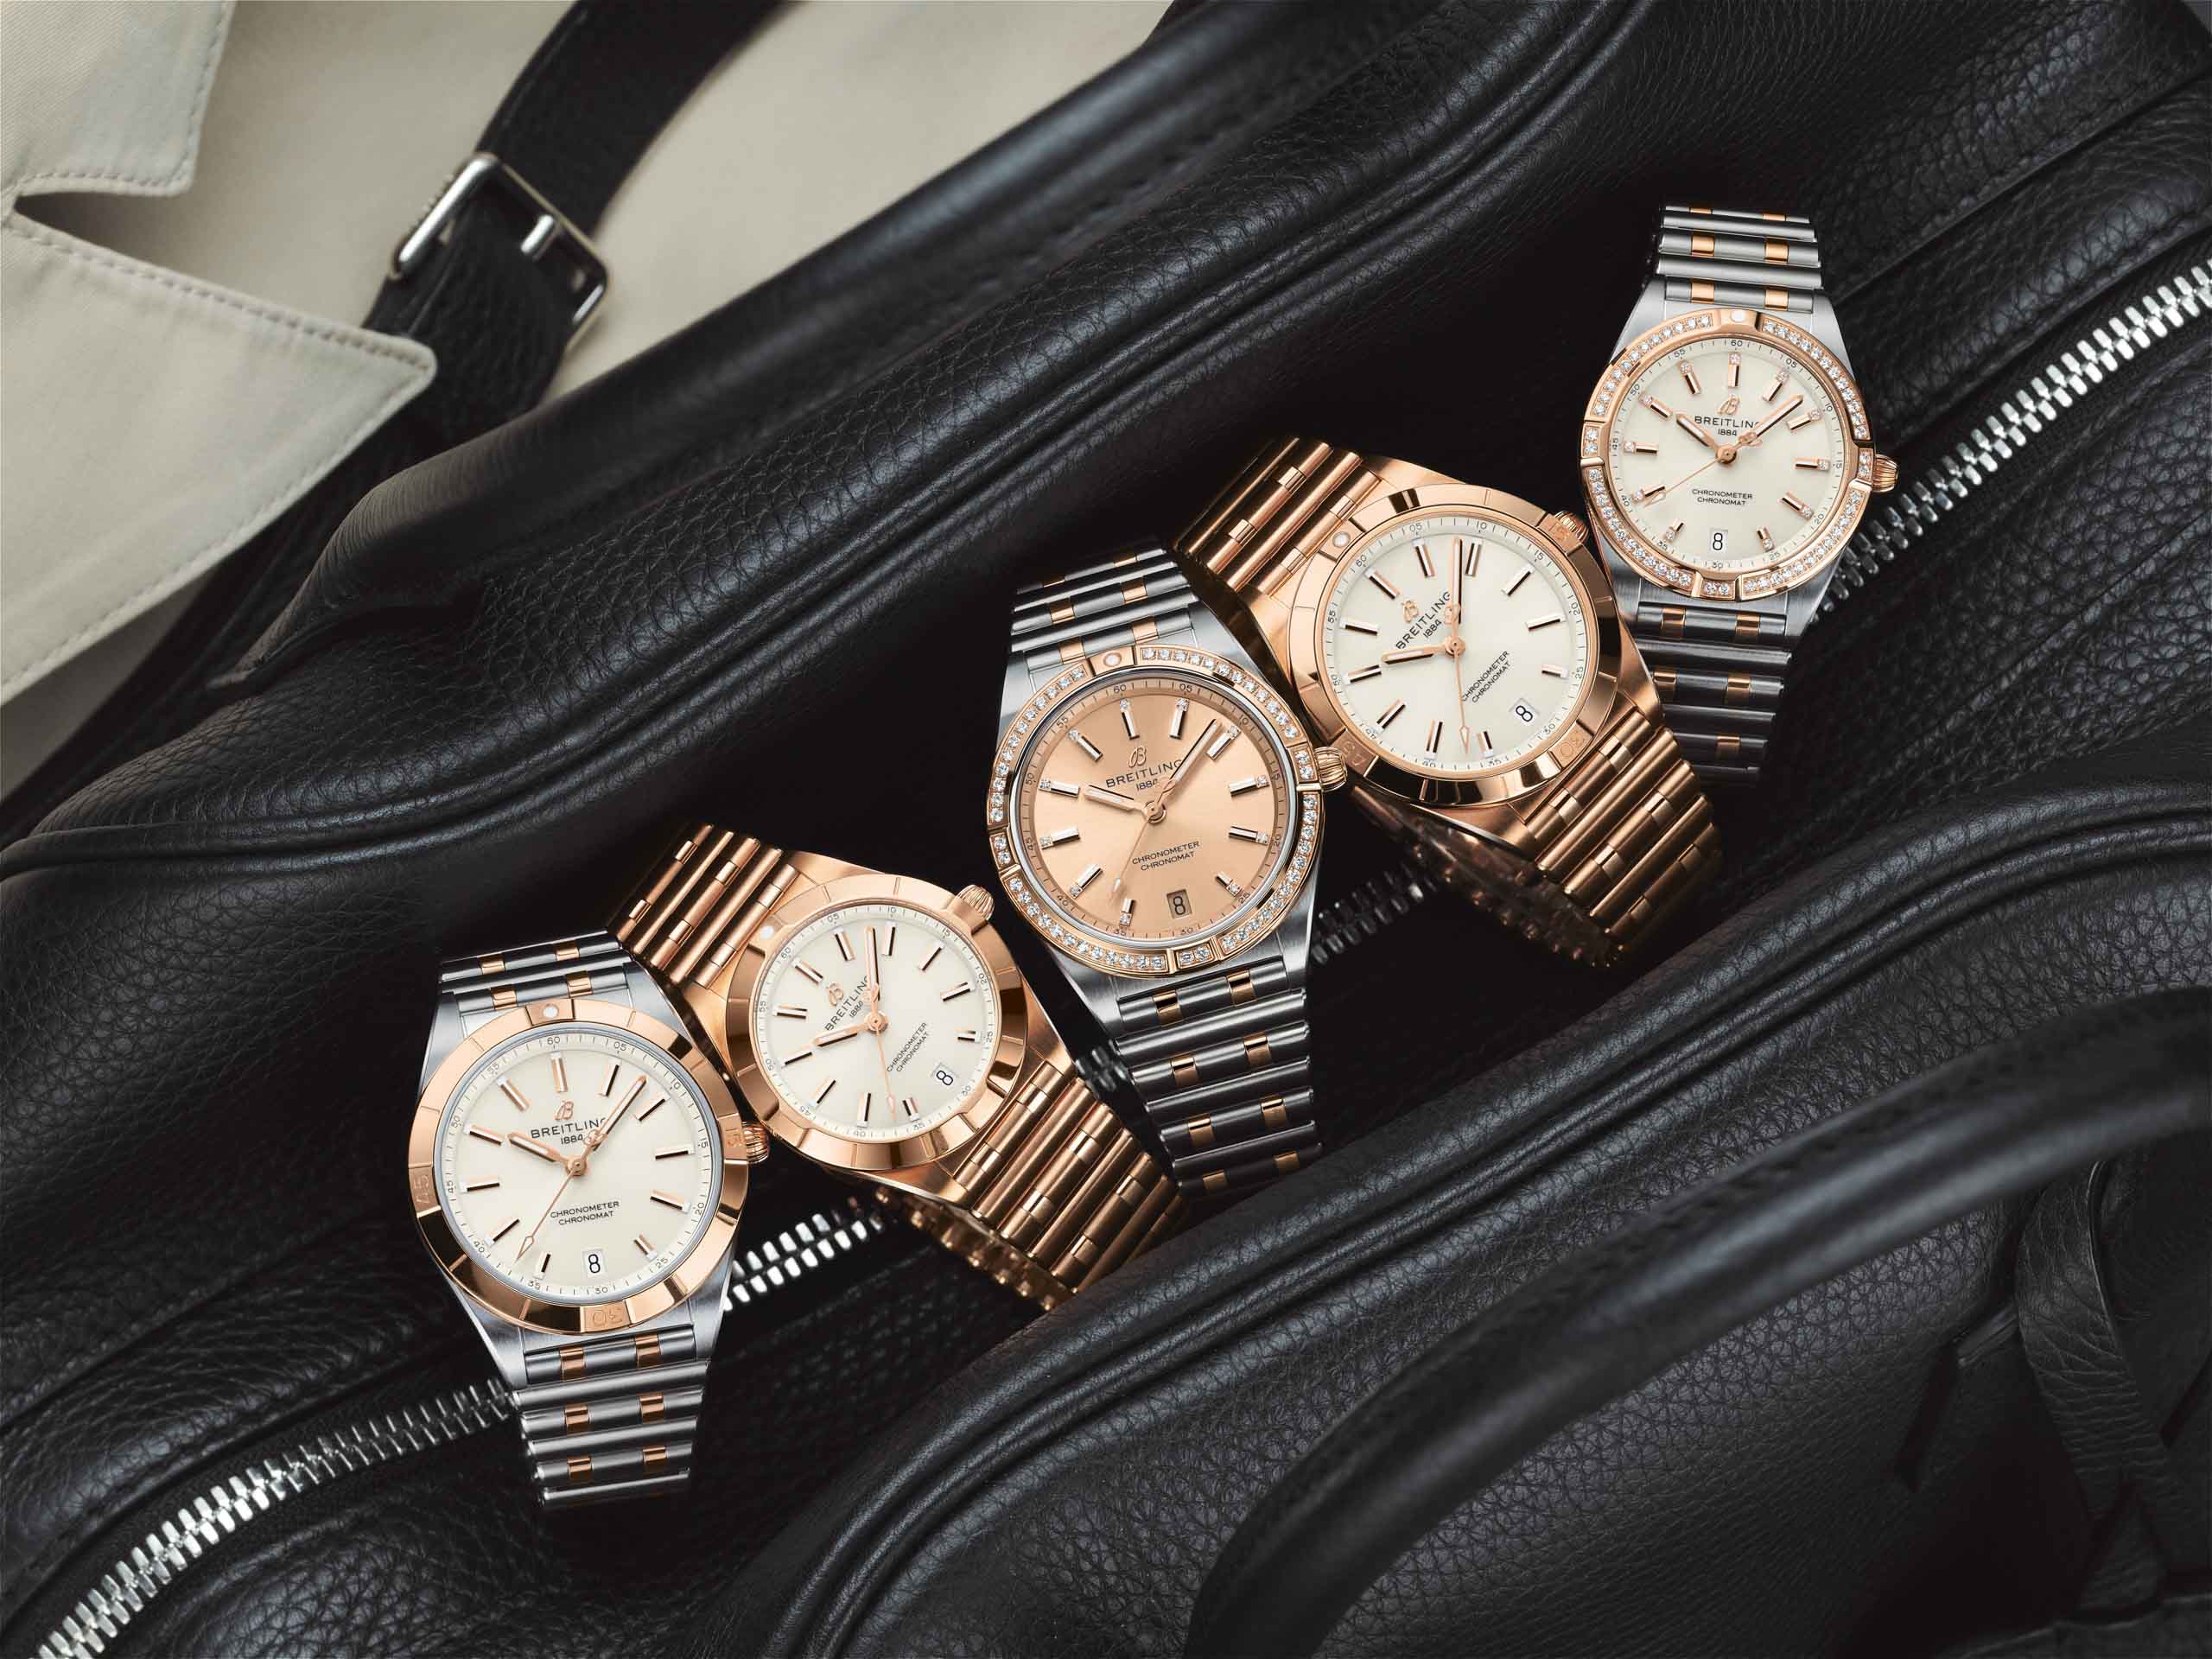 These new timepieces are especially for women by fake Breitling.